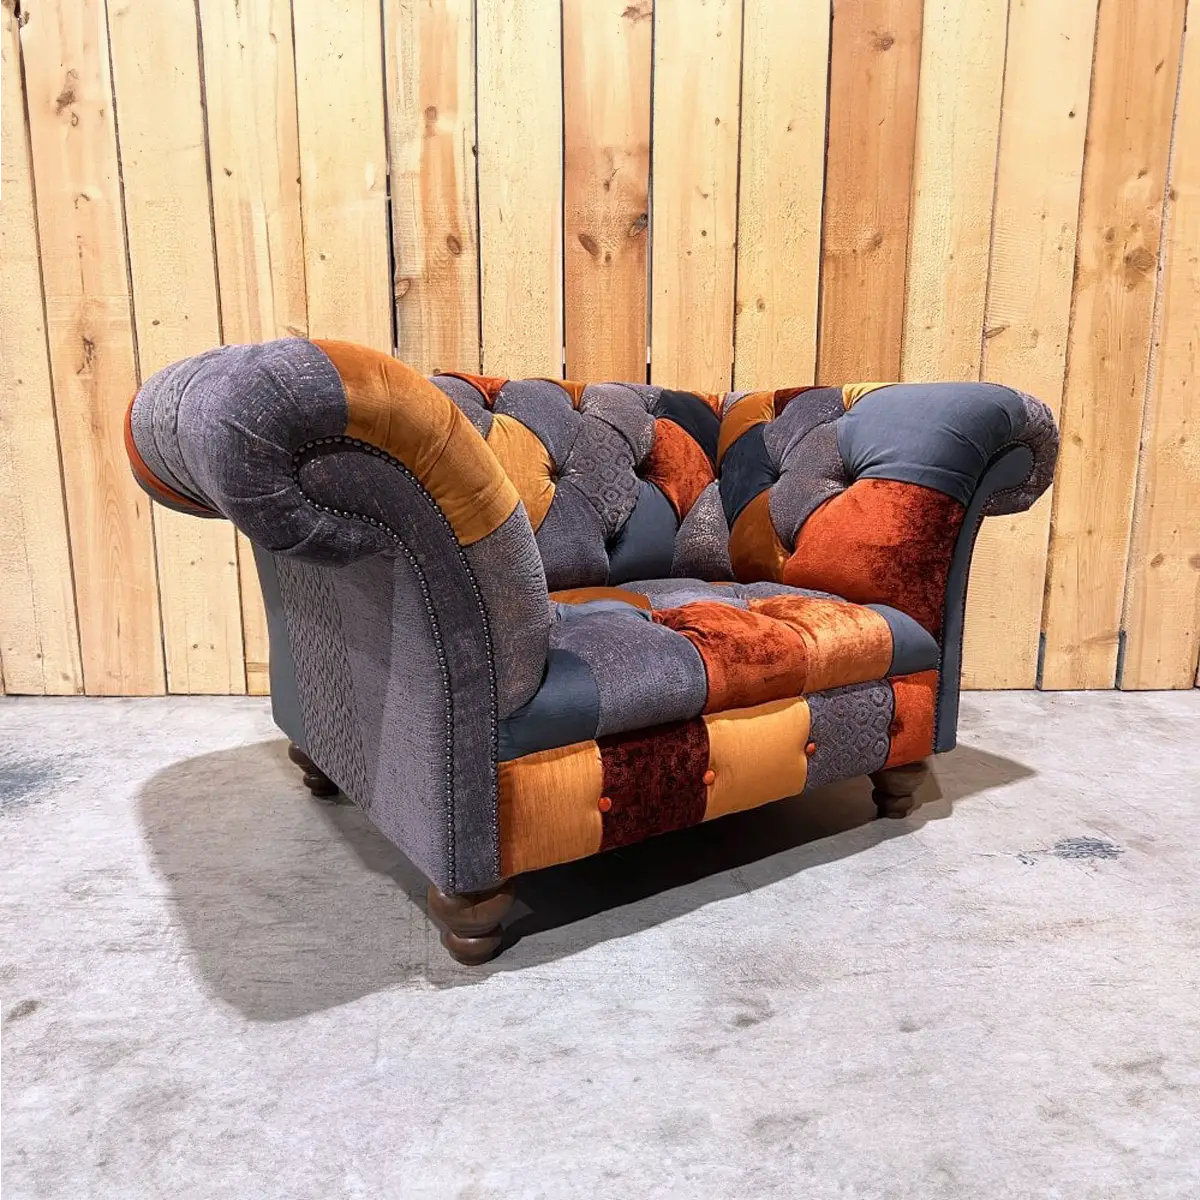 Oswald & Pablo Camborne Patchwork Velvet Chesterfield Snuggle Chair